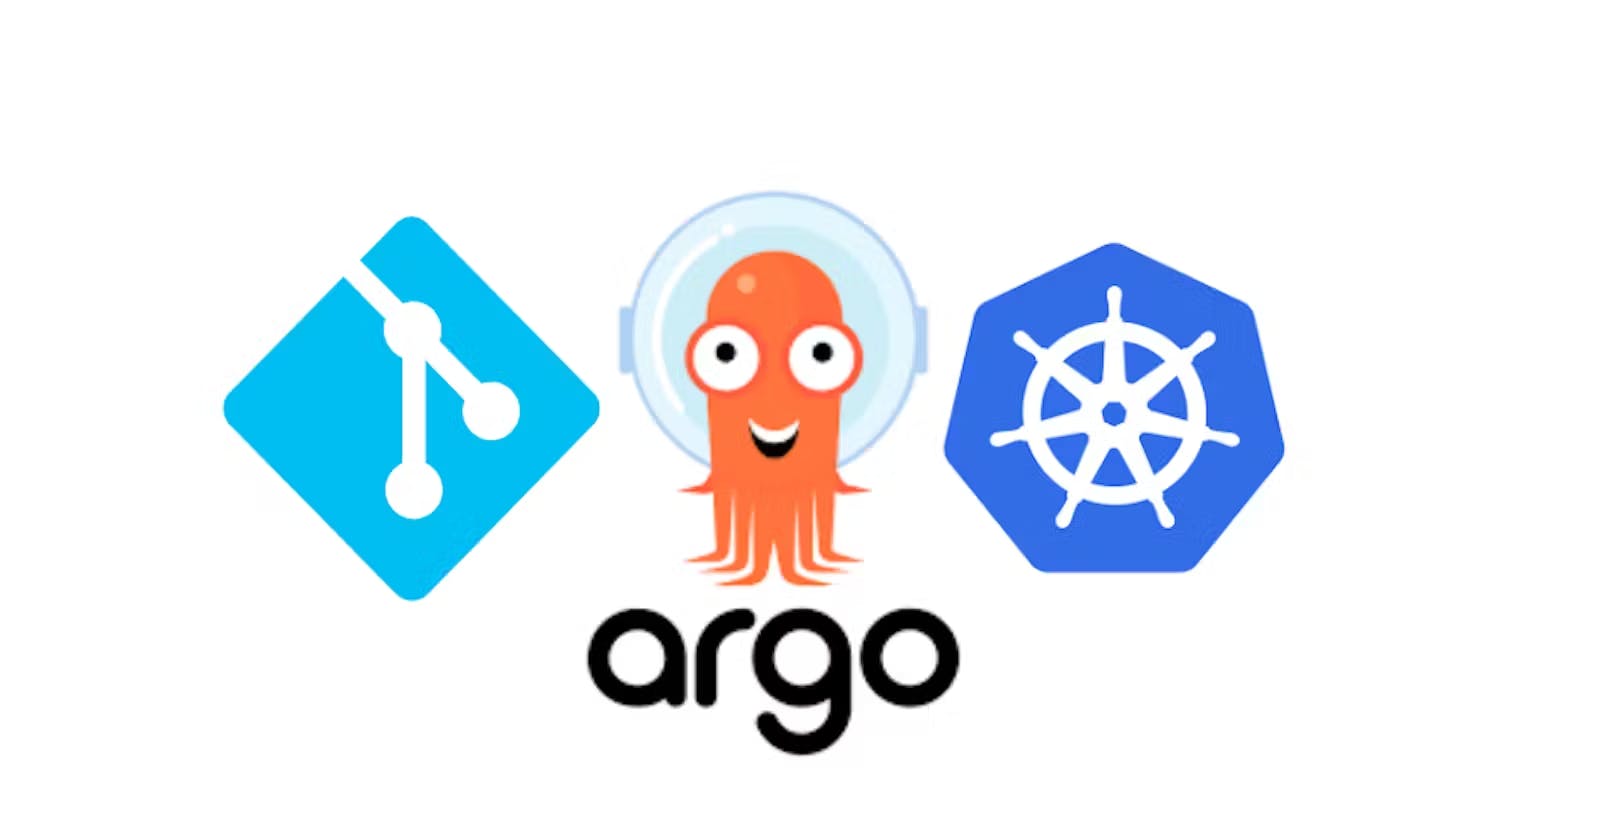 Getting started with ArgoCD